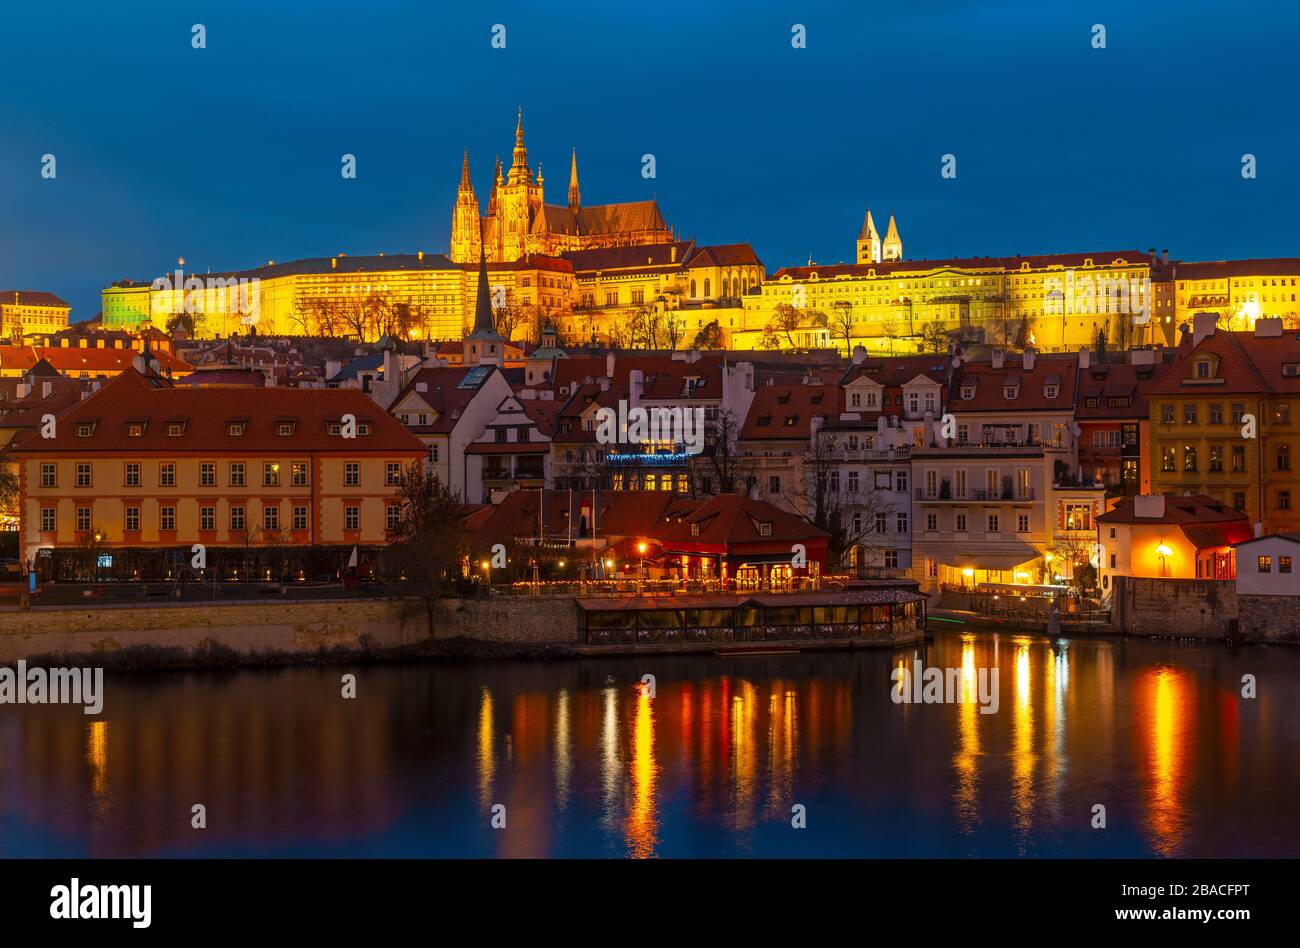 Prague Castle, also known as Hradcany Castle, at night along the Vltava river and the Saint Vitus cathedral on top, Czech Republic. Stock Photo